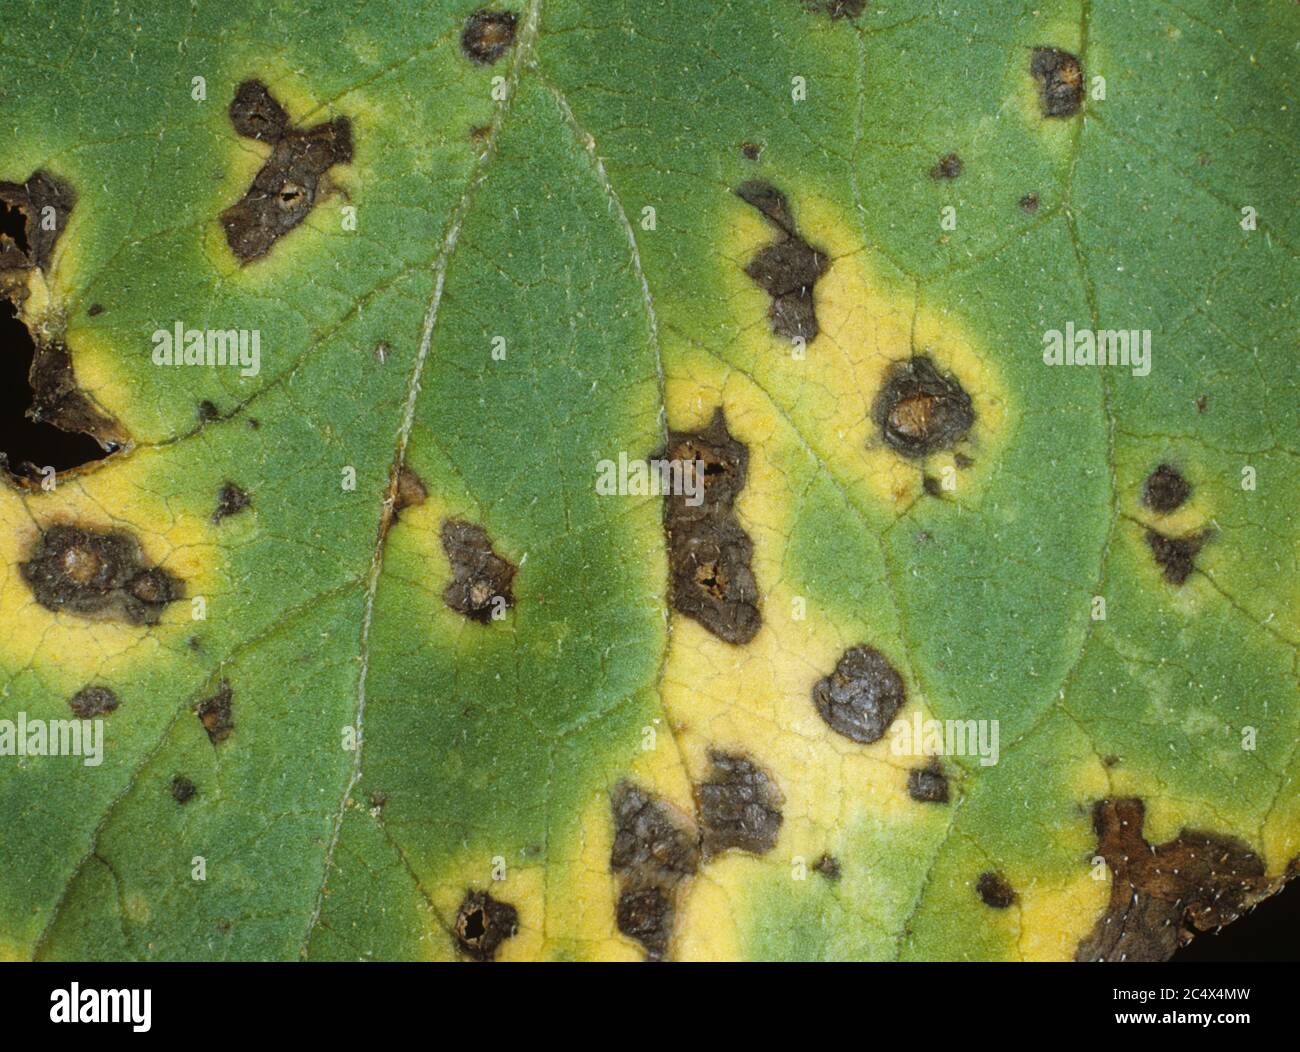 Leaf spot or alternaria blight (Alternaria helianthi) discreet spots with a chlorotic halo on a sunflower leaf, France Stock Photo